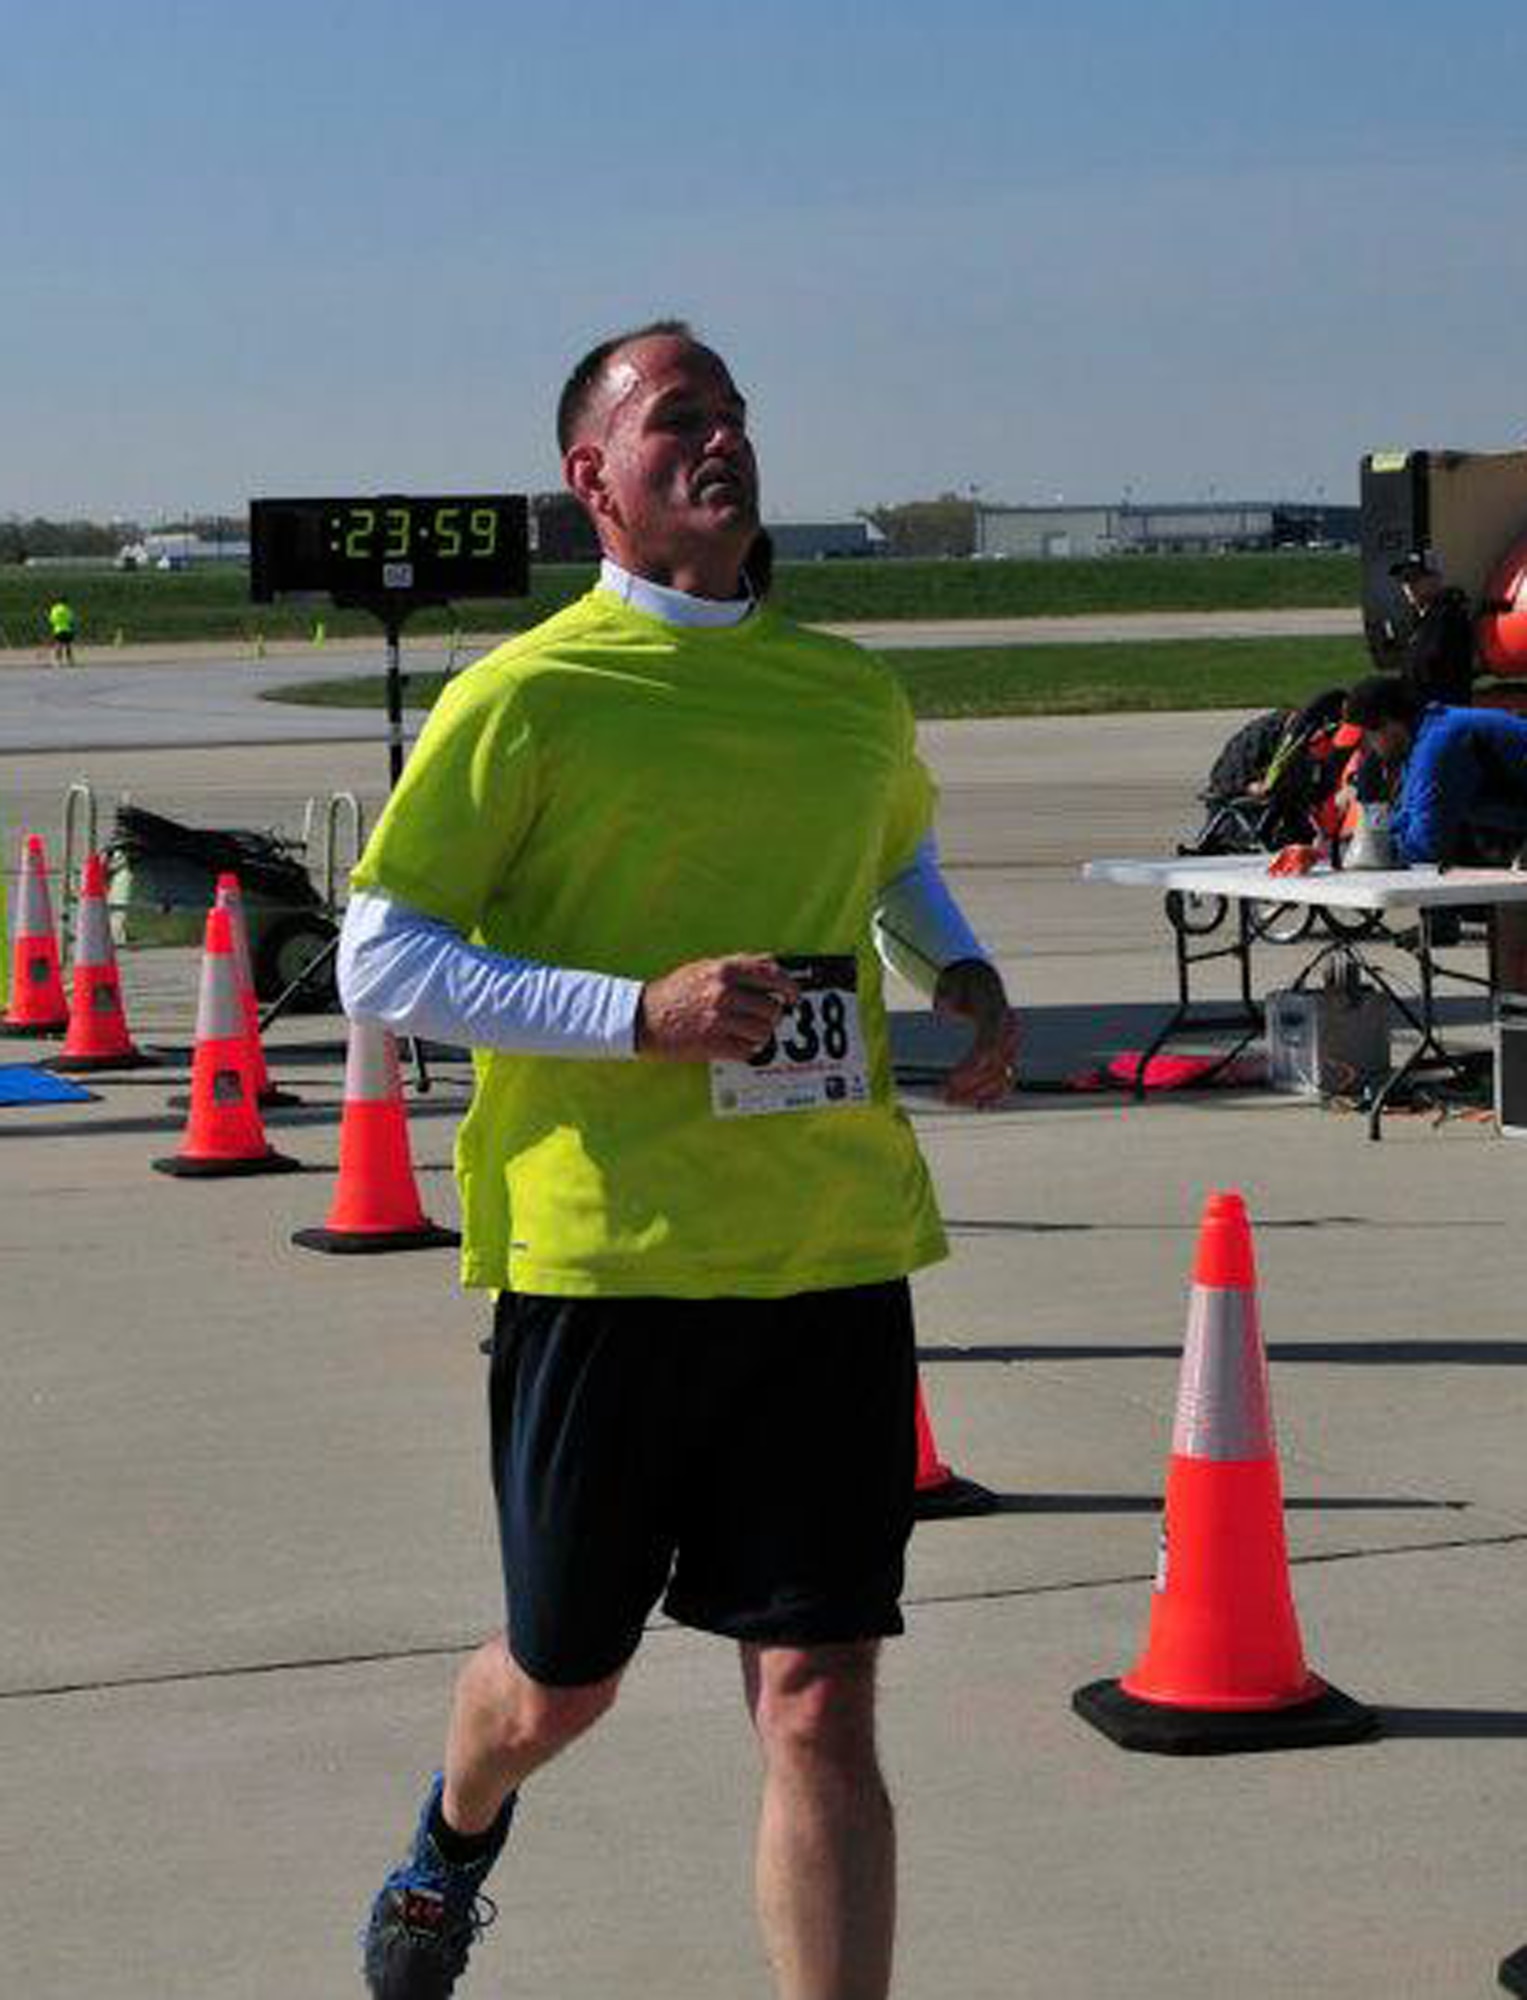 Senior Master Sgt. Dave Stevens crosses the finish line at the C-5 K Fun Run at the 167th Airlift Wing, April 27, 2013. Running became an integral part of Stevens' quest for a healthier lifestyle. (Air National Guard photo by Tech. Sgt. Robert Fluharty)